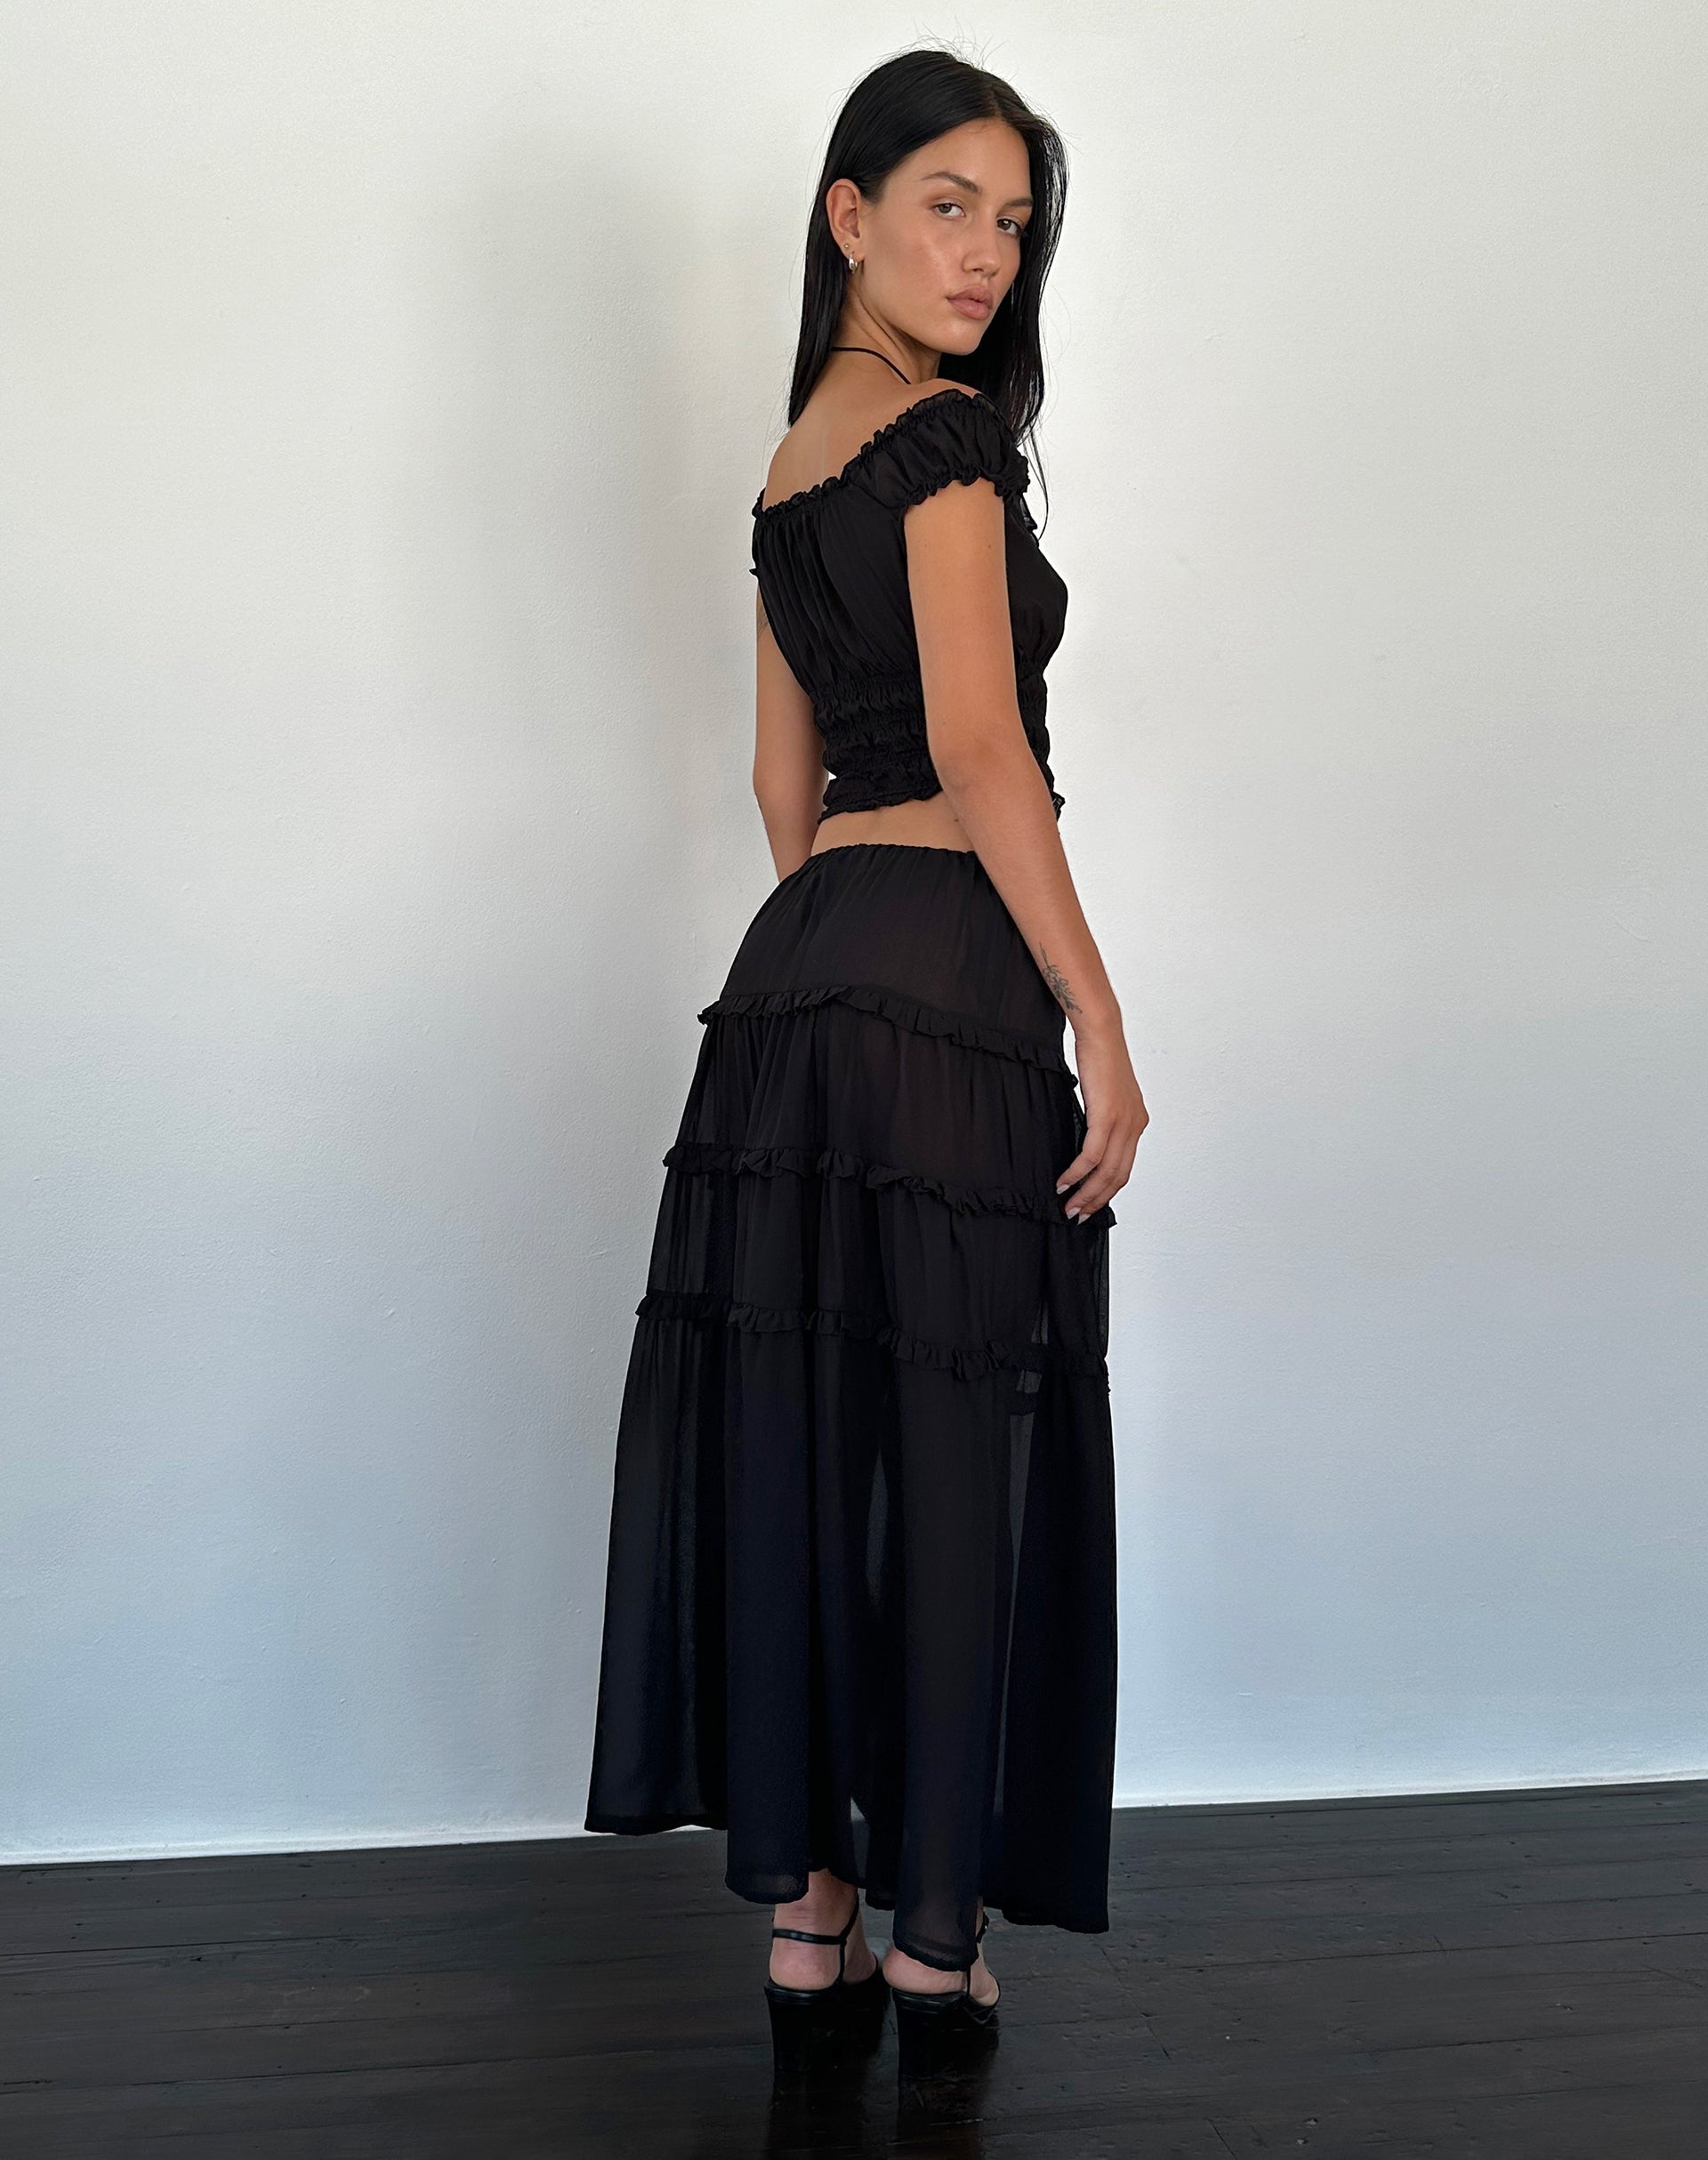 High Waist Double Layer Chiffon Pants With Wide Leg And Split Design  Elegant Black Chiffon Trousers For Womens Summer Wear 211007 From Bai06,  $16.31 | DHgate.Com